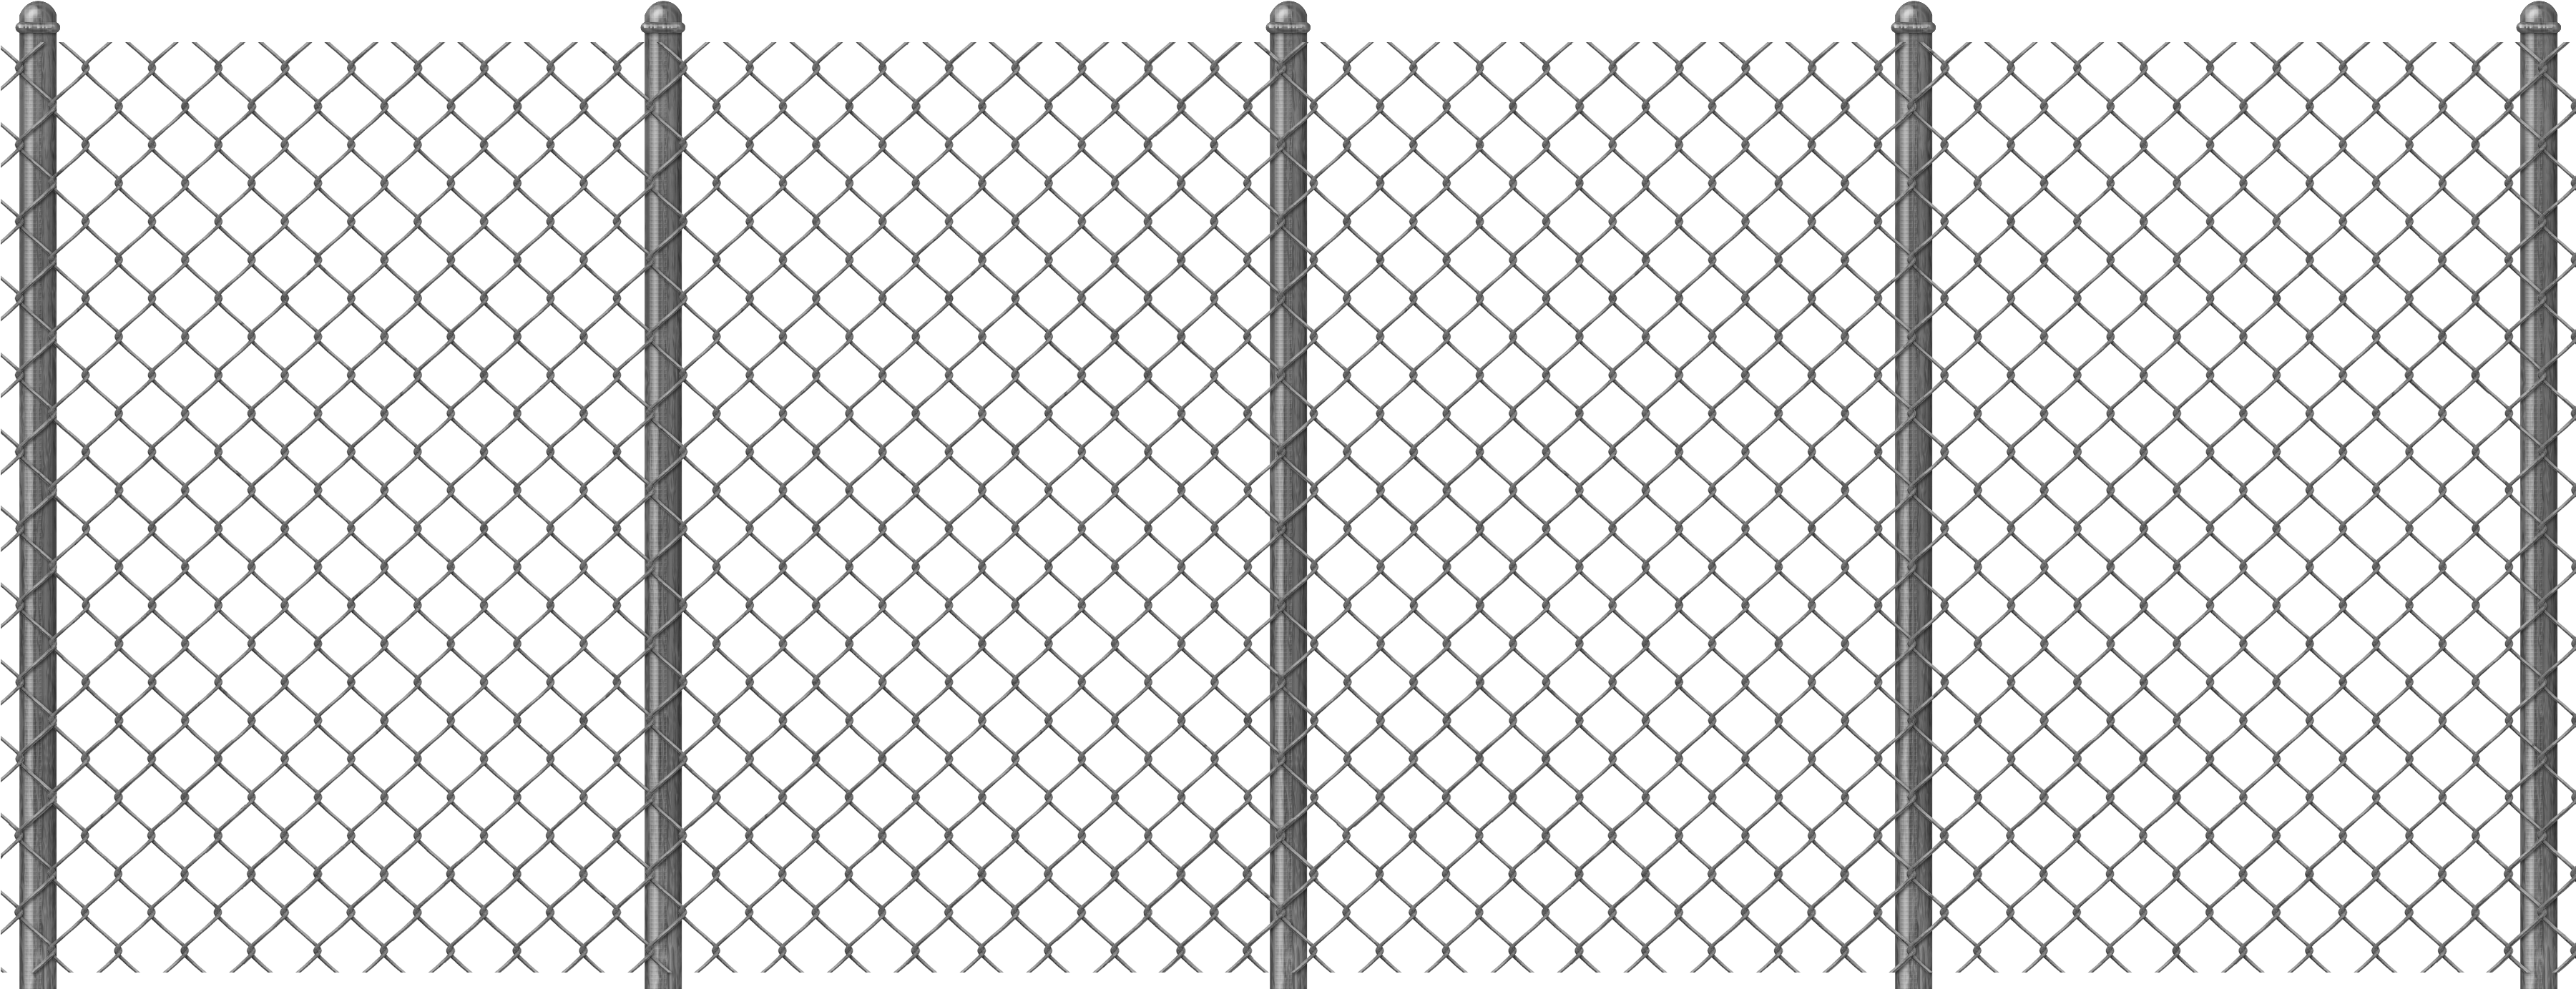 Chain Link Fence Png 3601 X 1383